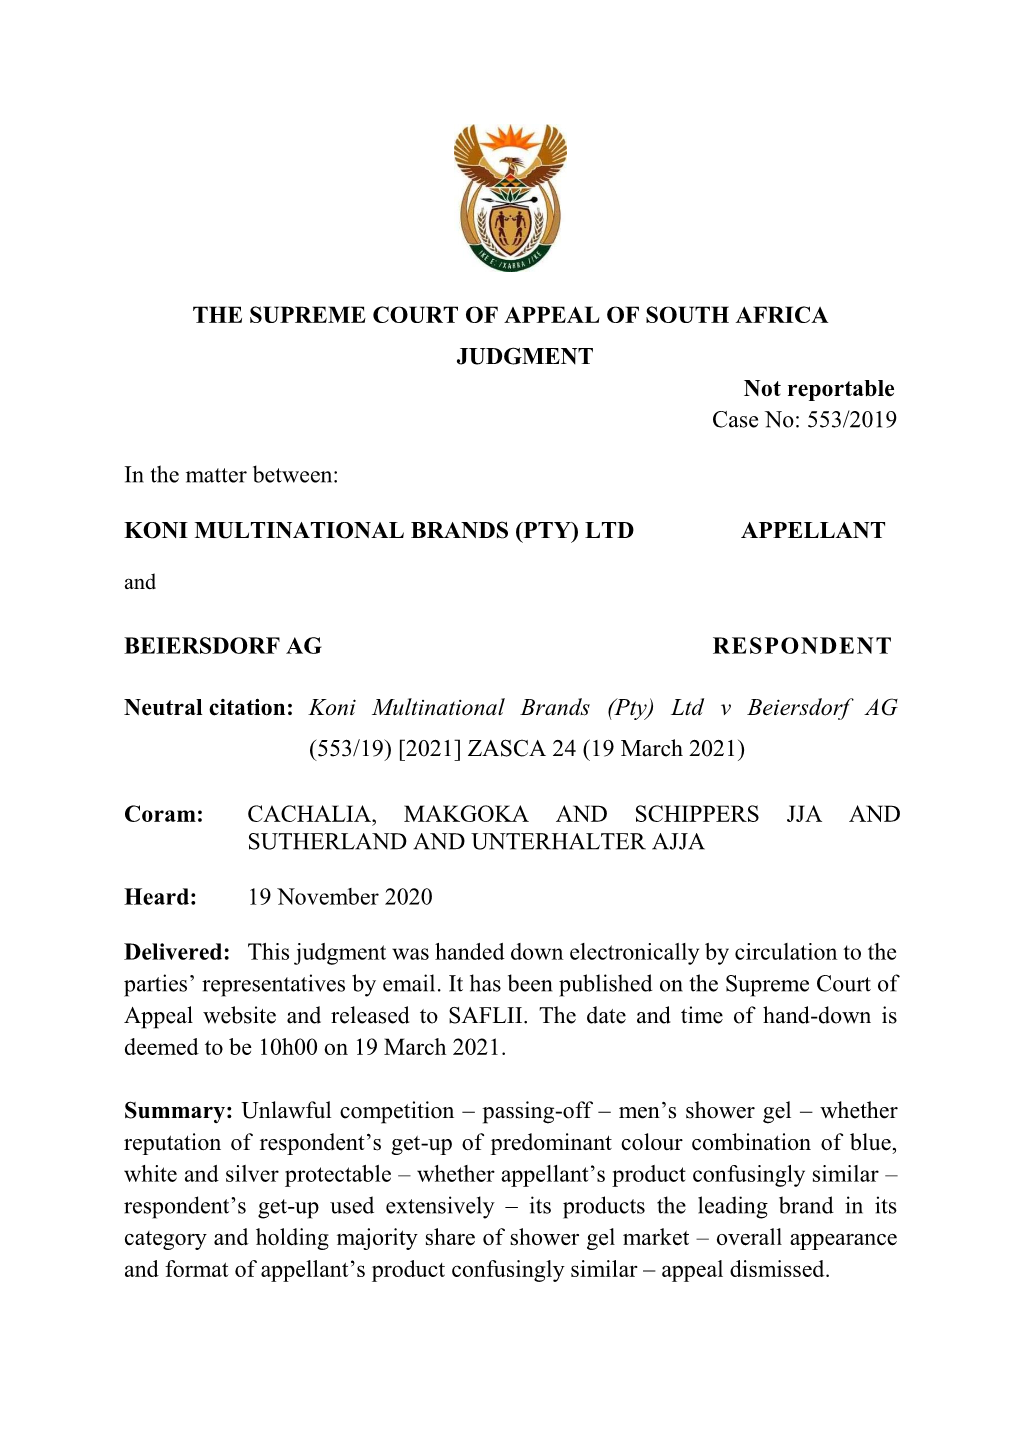 THE SUPREME COURT of APPEAL of SOUTH AFRICA JUDGMENT Not Reportable Case No: 553/2019